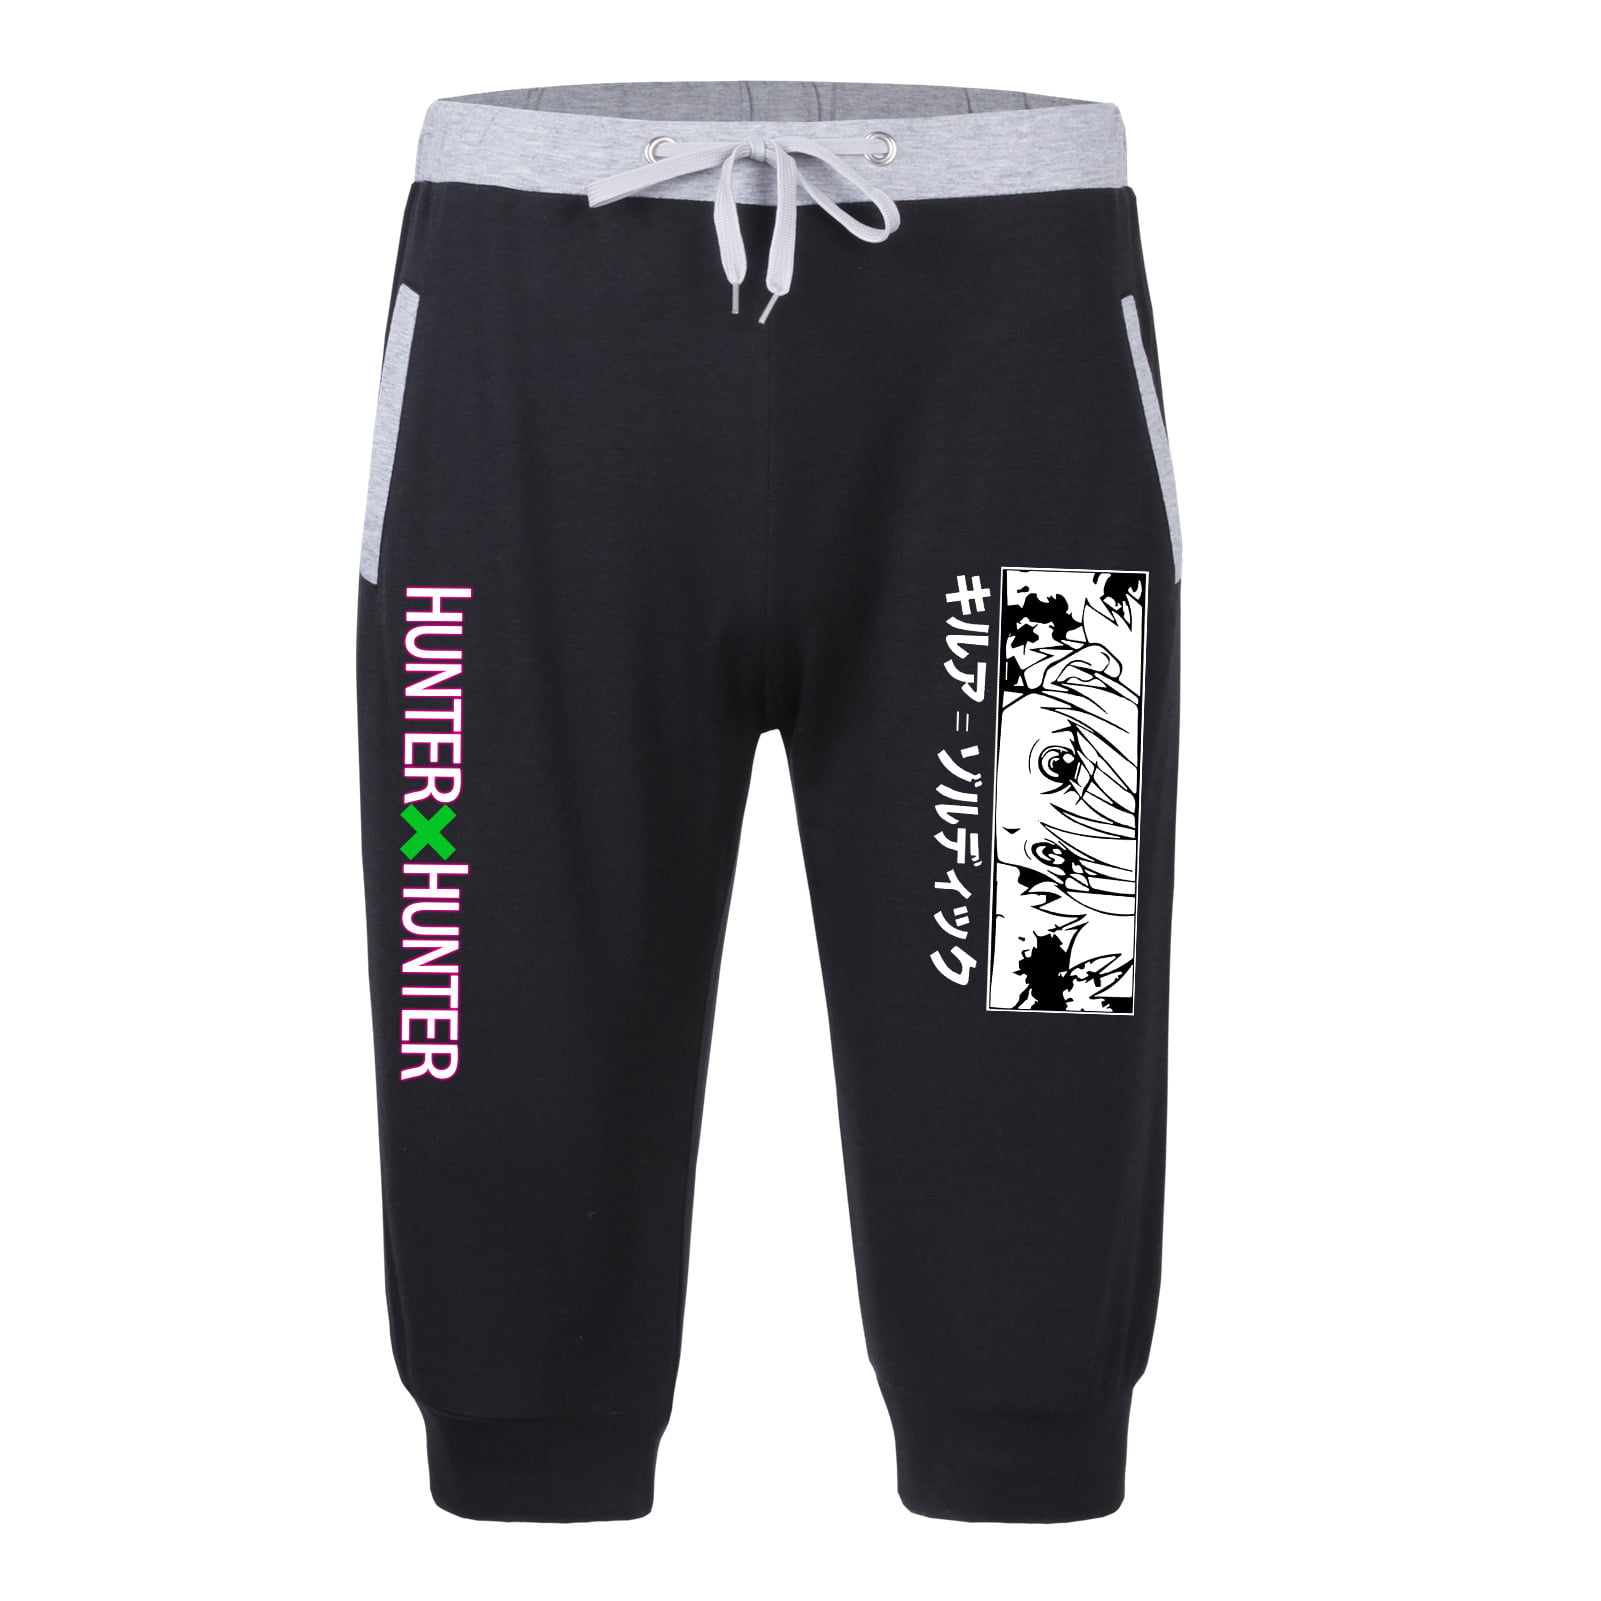 You Will Like it Mens Sport Pure Color Bandage Casual Loose Sweatpants Drawstring Shorts Pant Dude Trust me 